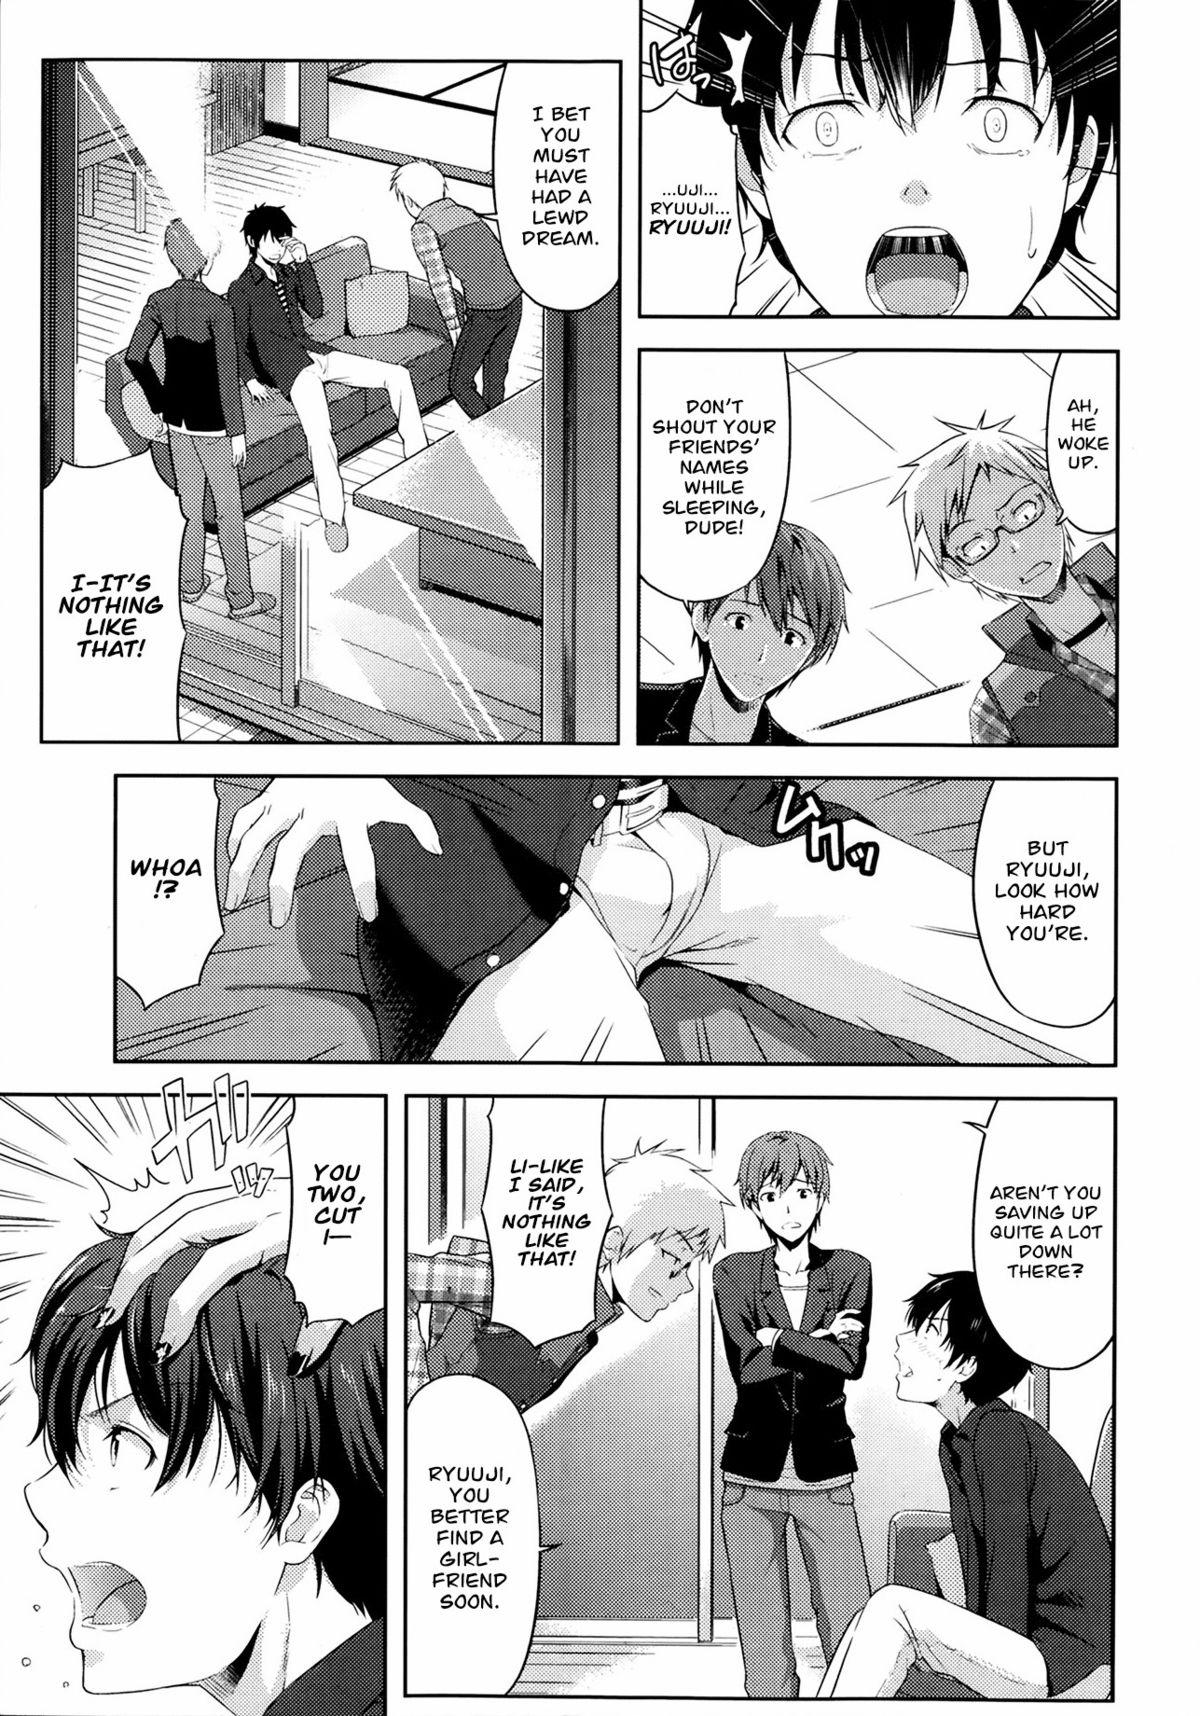 Horny Slut Transit + Otometic Overdrive Room - Page 5